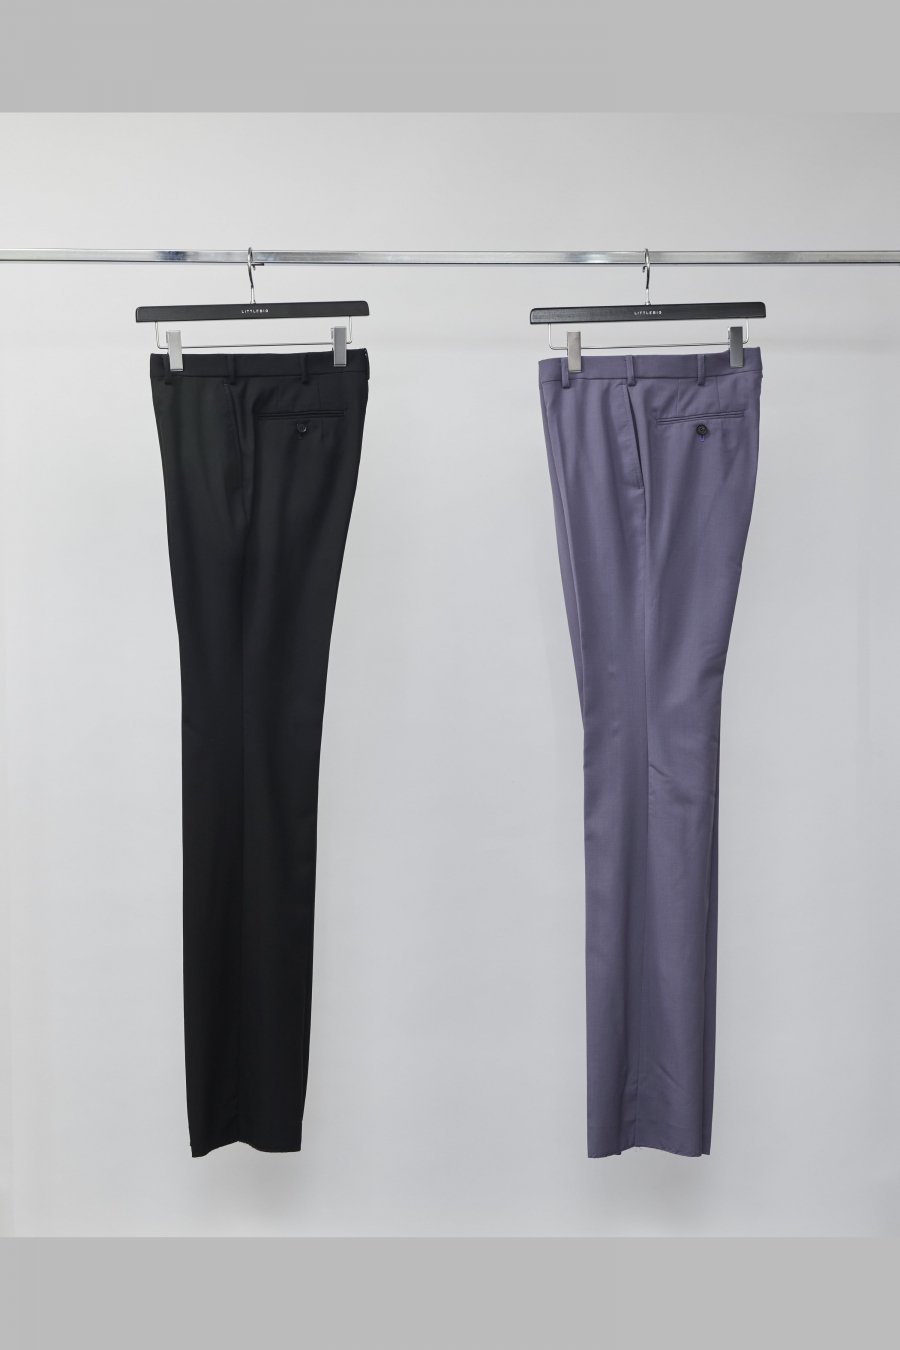 LITTLEBIG  Slim Flare Trousers（Black or Purple）<img class='new_mark_img2' src='https://img.shop-pro.jp/img/new/icons15.gif' style='border:none;display:inline;margin:0px;padding:0px;width:auto;' />